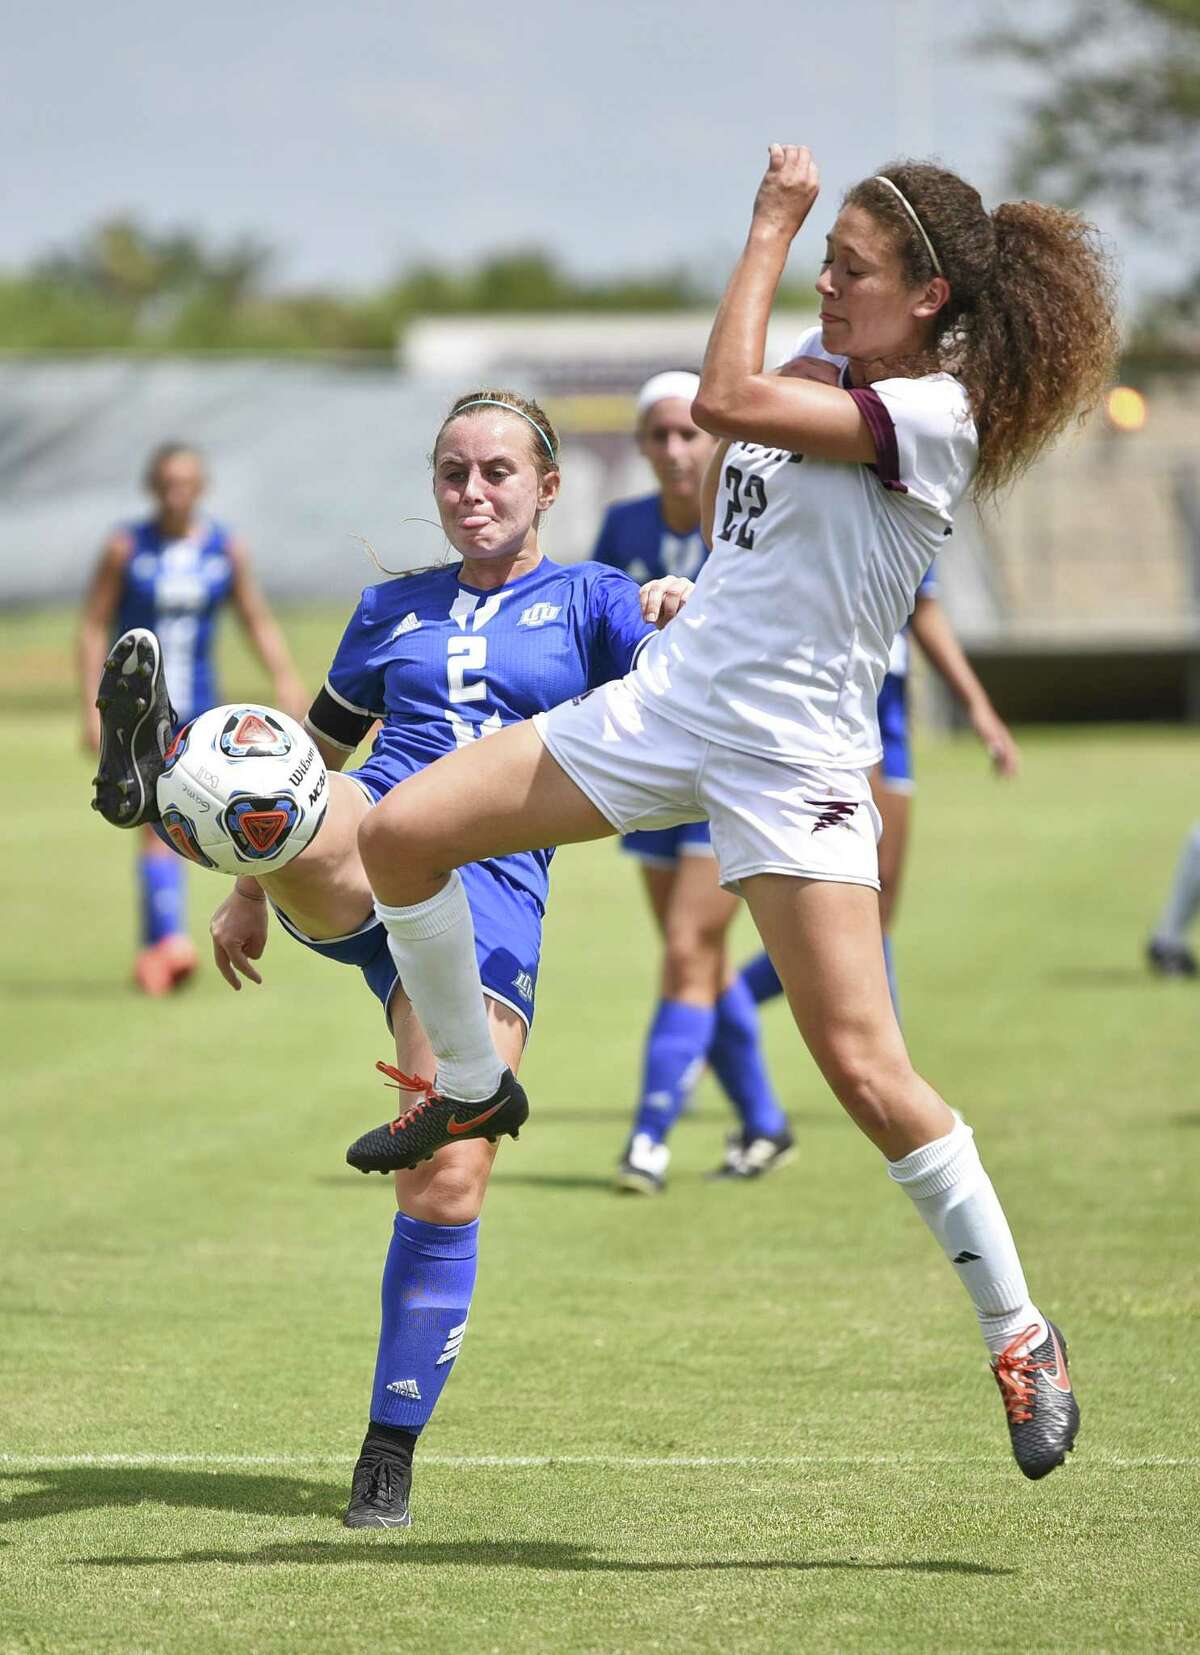 Nicole Cohen was one of three players with a goal on Sunday as TAMIU won its season opener 3-2 at Texas of the Permian Basin.